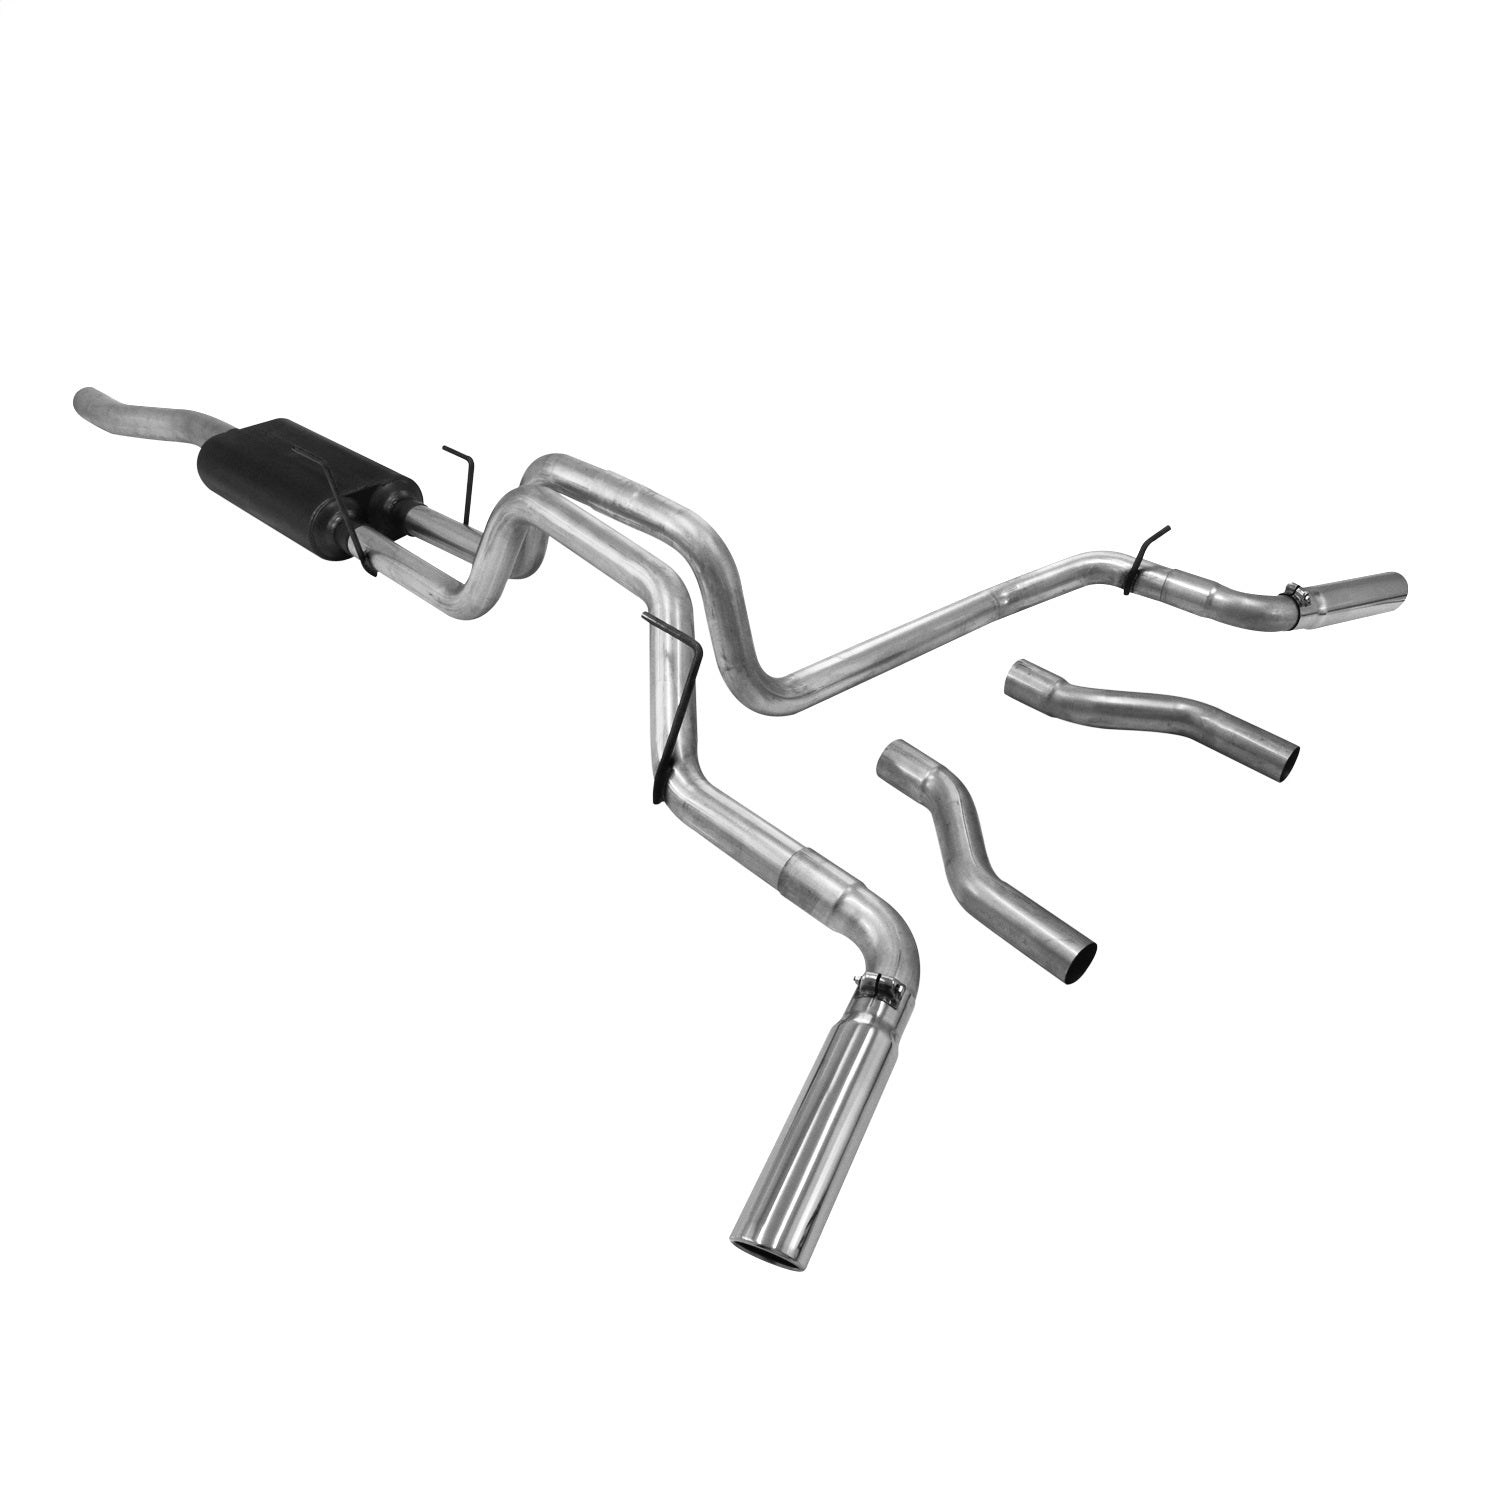 Flowmaster 817507 American Thunder Cat Back Exhaust System